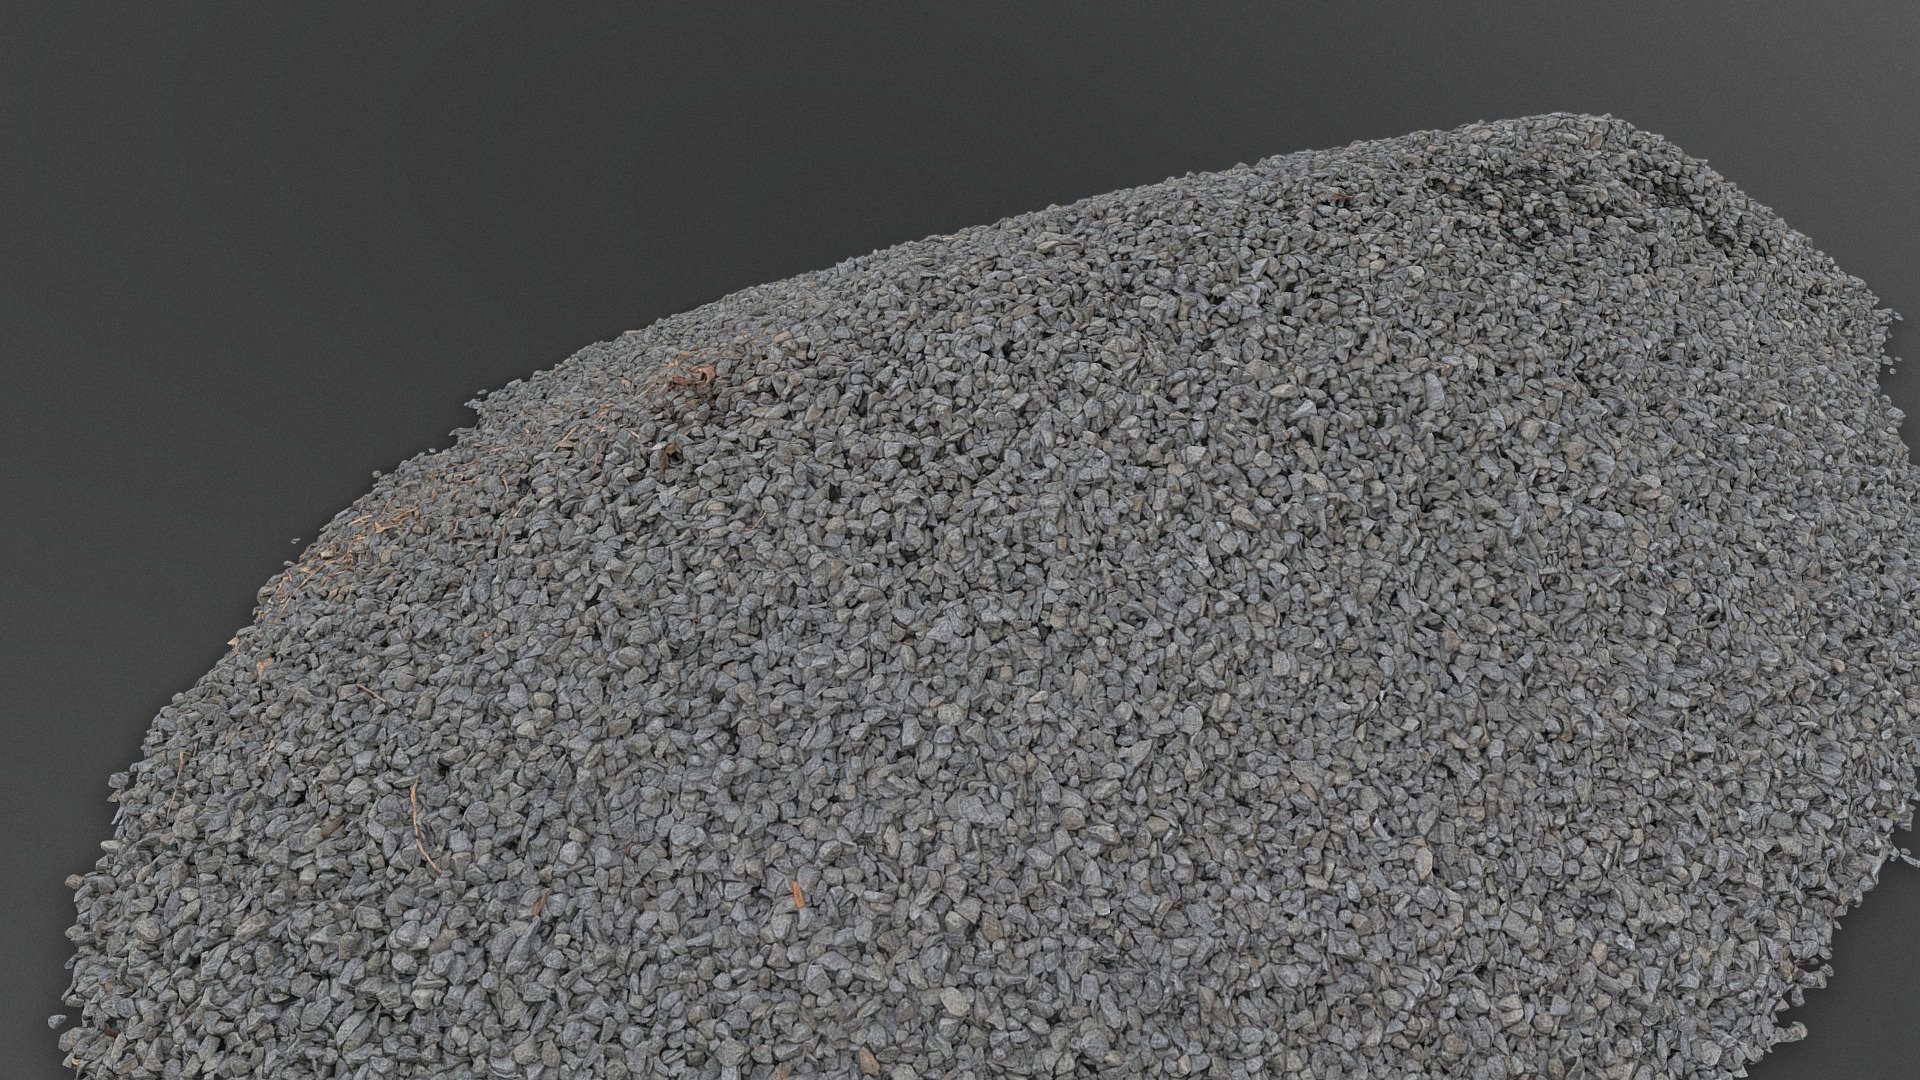 Gray Paving gravel heap pile mound of building pavement construction material small stones pebble of quartz and some dry weed

Photogrammetry scan 140x36MP, 3x8K texture  + hd normals - Gray paving gravel - Buy Royalty Free 3D model by matousekfoto 3d model